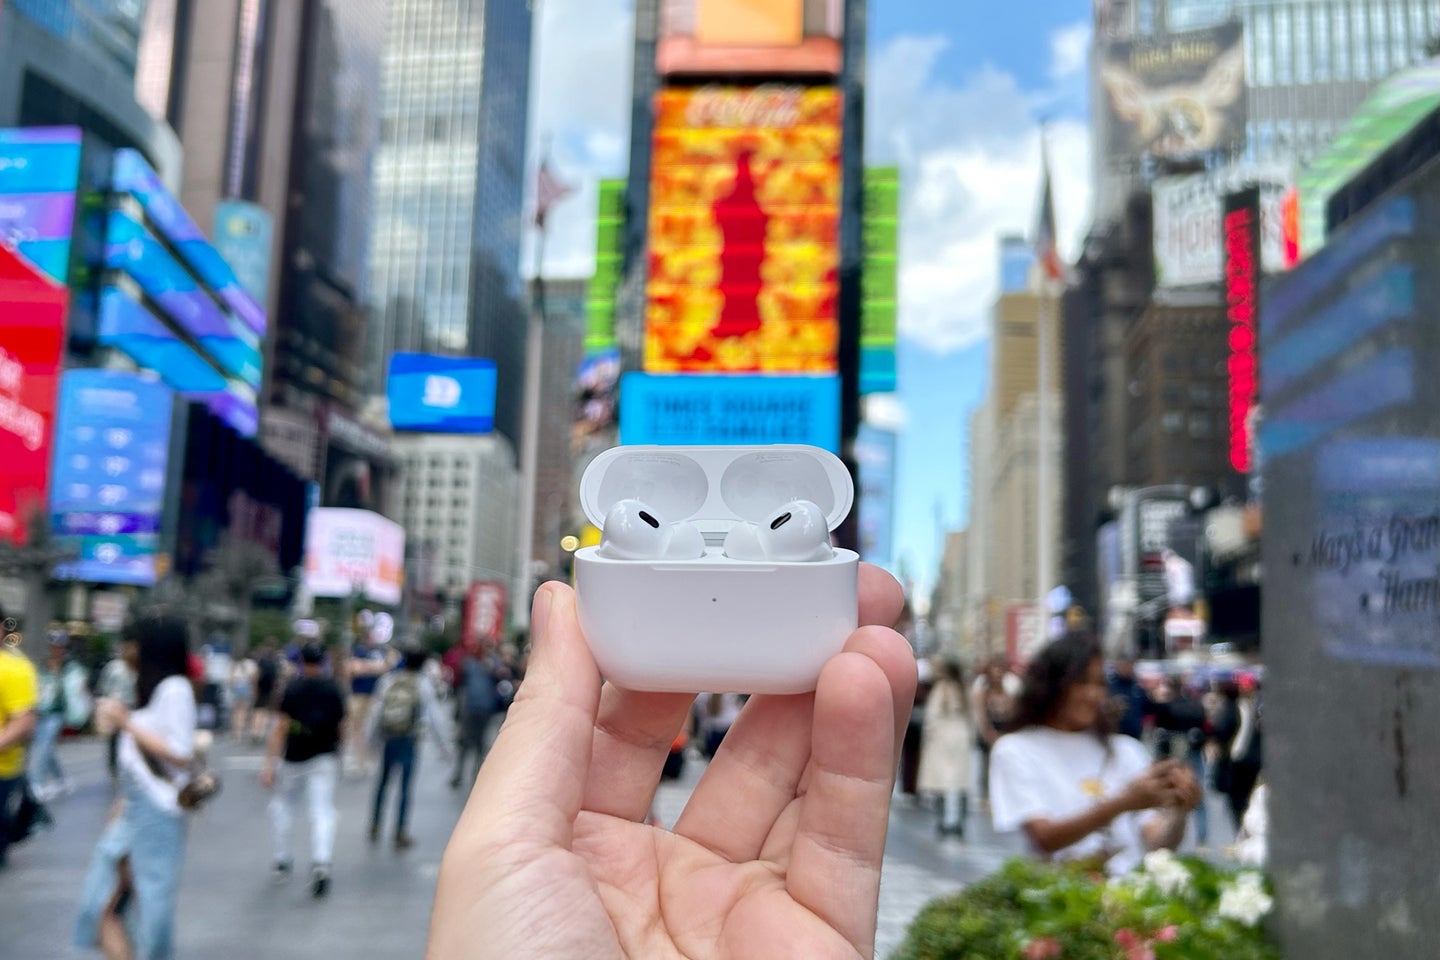 Apple AirPods Pro (2nd generation) earbuds in Times Square